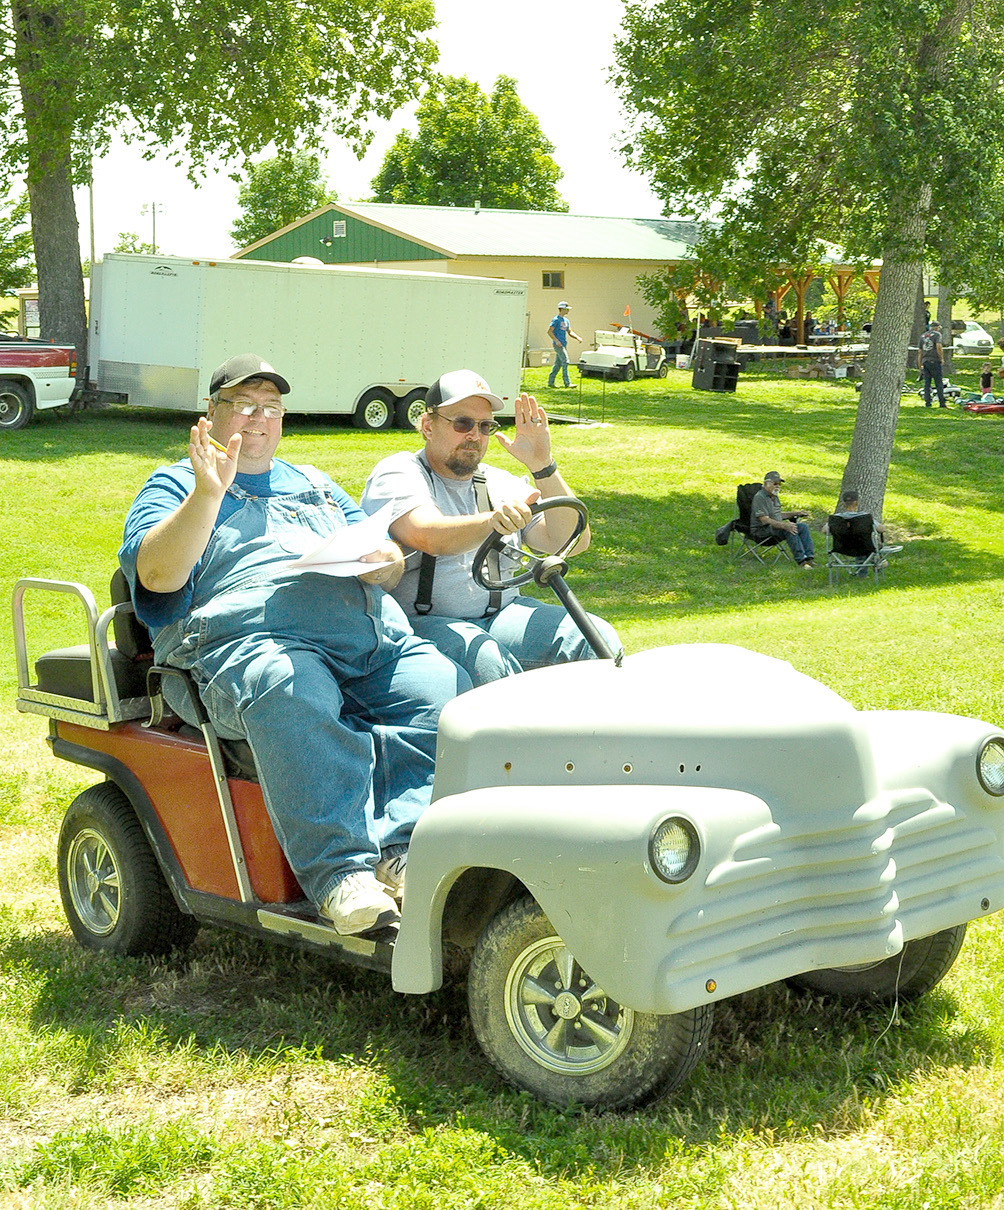 STOCKTON RODDERS’ members Dean Kester and Adam Bryant make the rounds during Saturday’s Car Show which was held in Stockton City Park. The much-anticipated annual event was also sponsored by the City of Stockton, Rooks County EMS, and Stockton Chamber of Commerce.